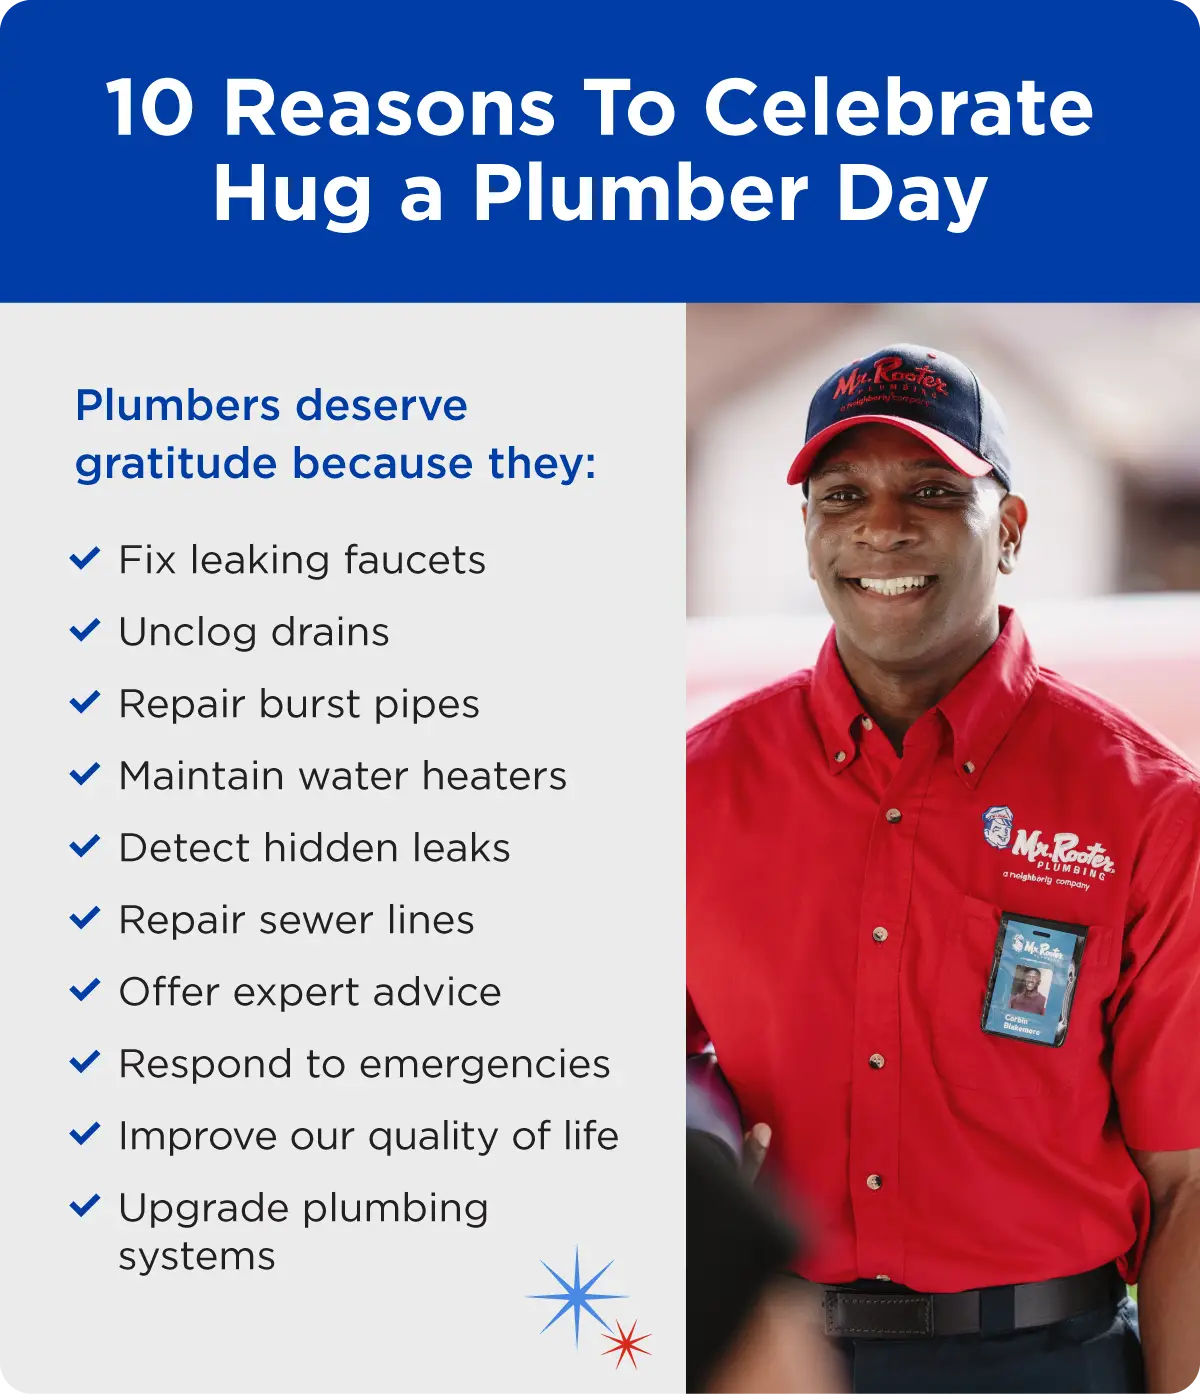 A Mr. Rooter Plumbing service professional and a list of 10 reasons to celebrate National Hug a Plumber Day